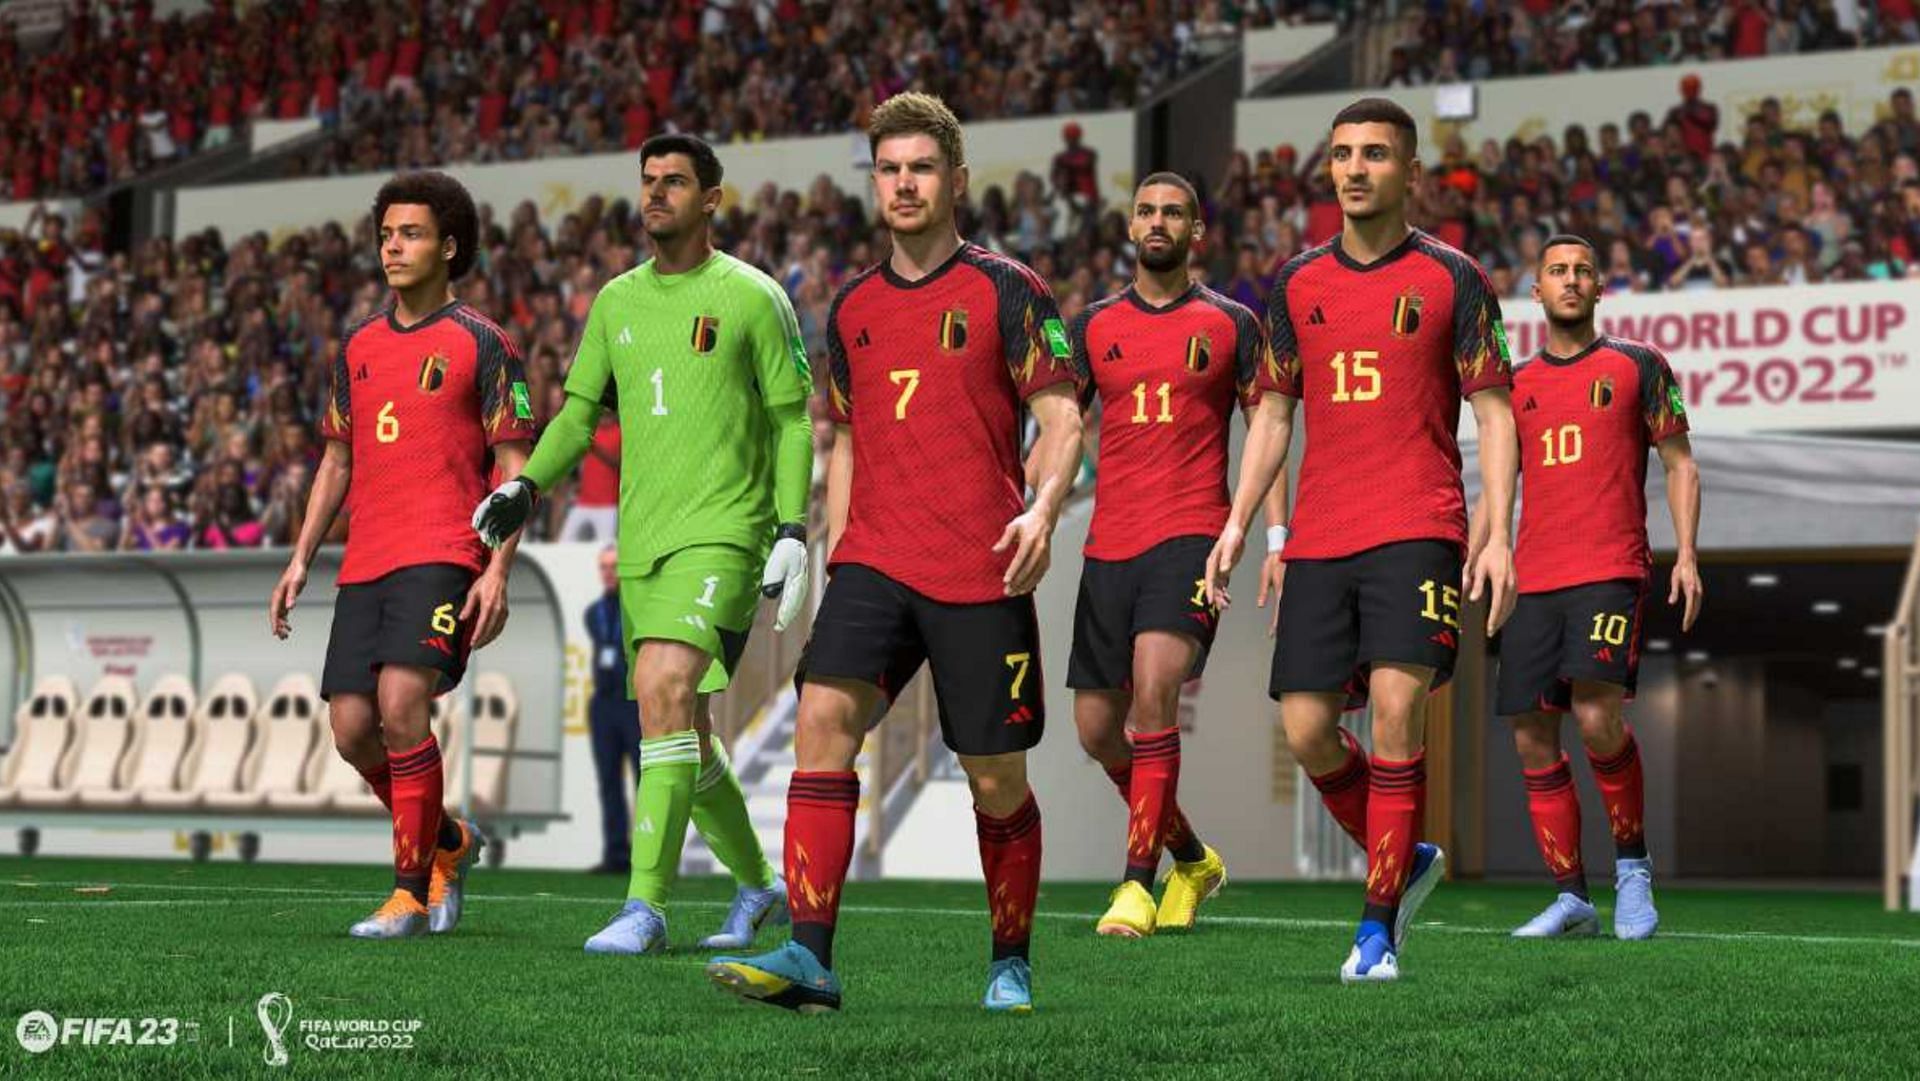 FIFA 23 Patch #5 Coming Soon to Address Gameplay, FIFA World Cup